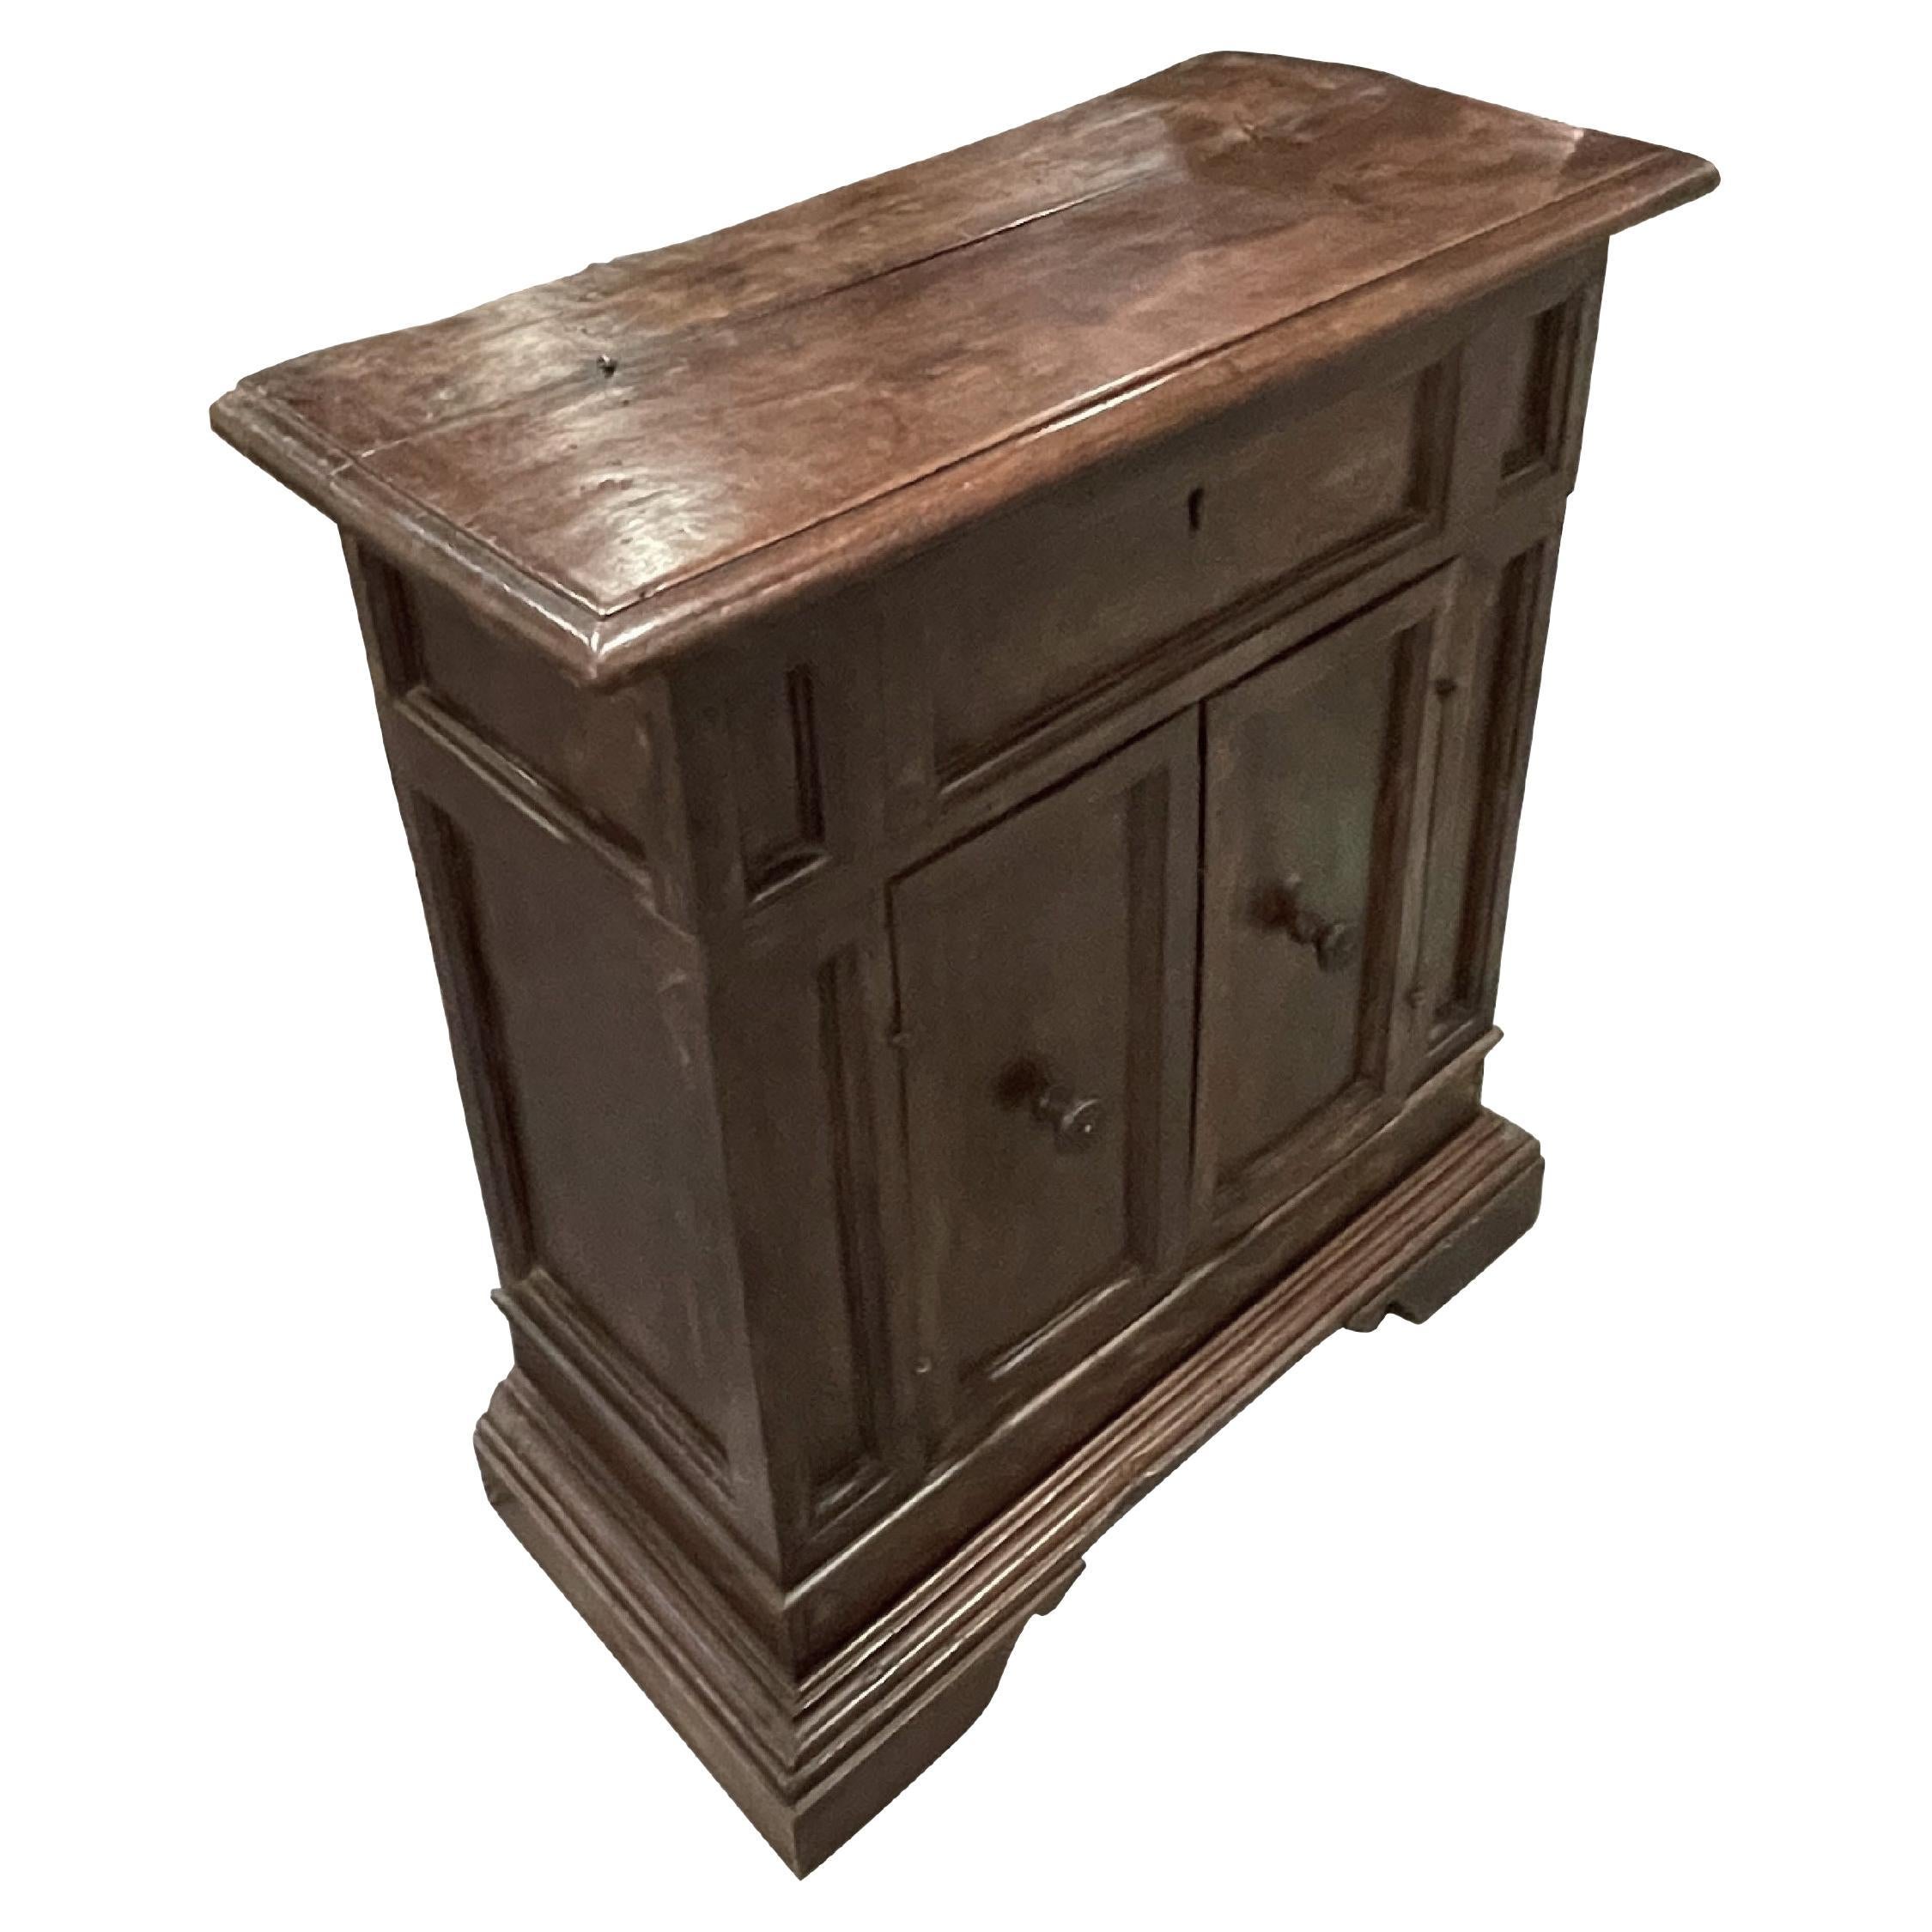 Aged Walnut Two Door Flip Top Cabinet Or Side Table, Italy, 17th Century